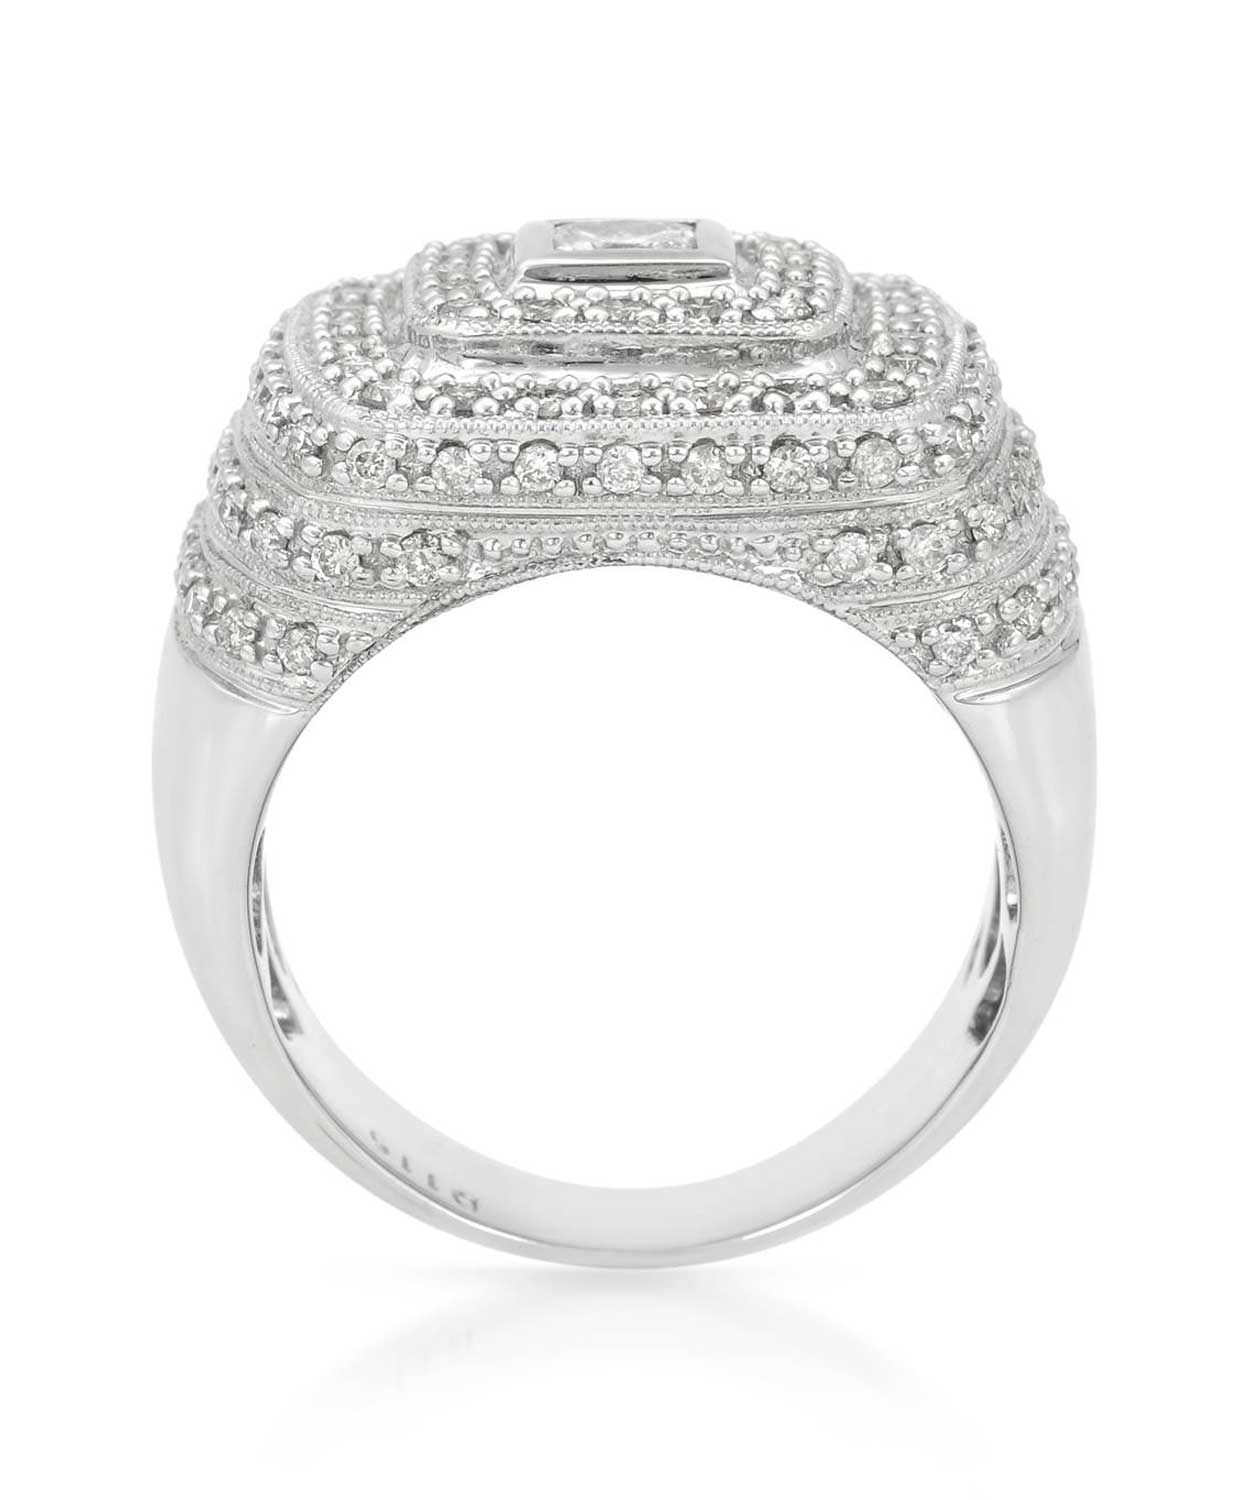 Allure Collection 1.17 ctw Diamond 14k White Gold Statement Right Hand Ring View 2